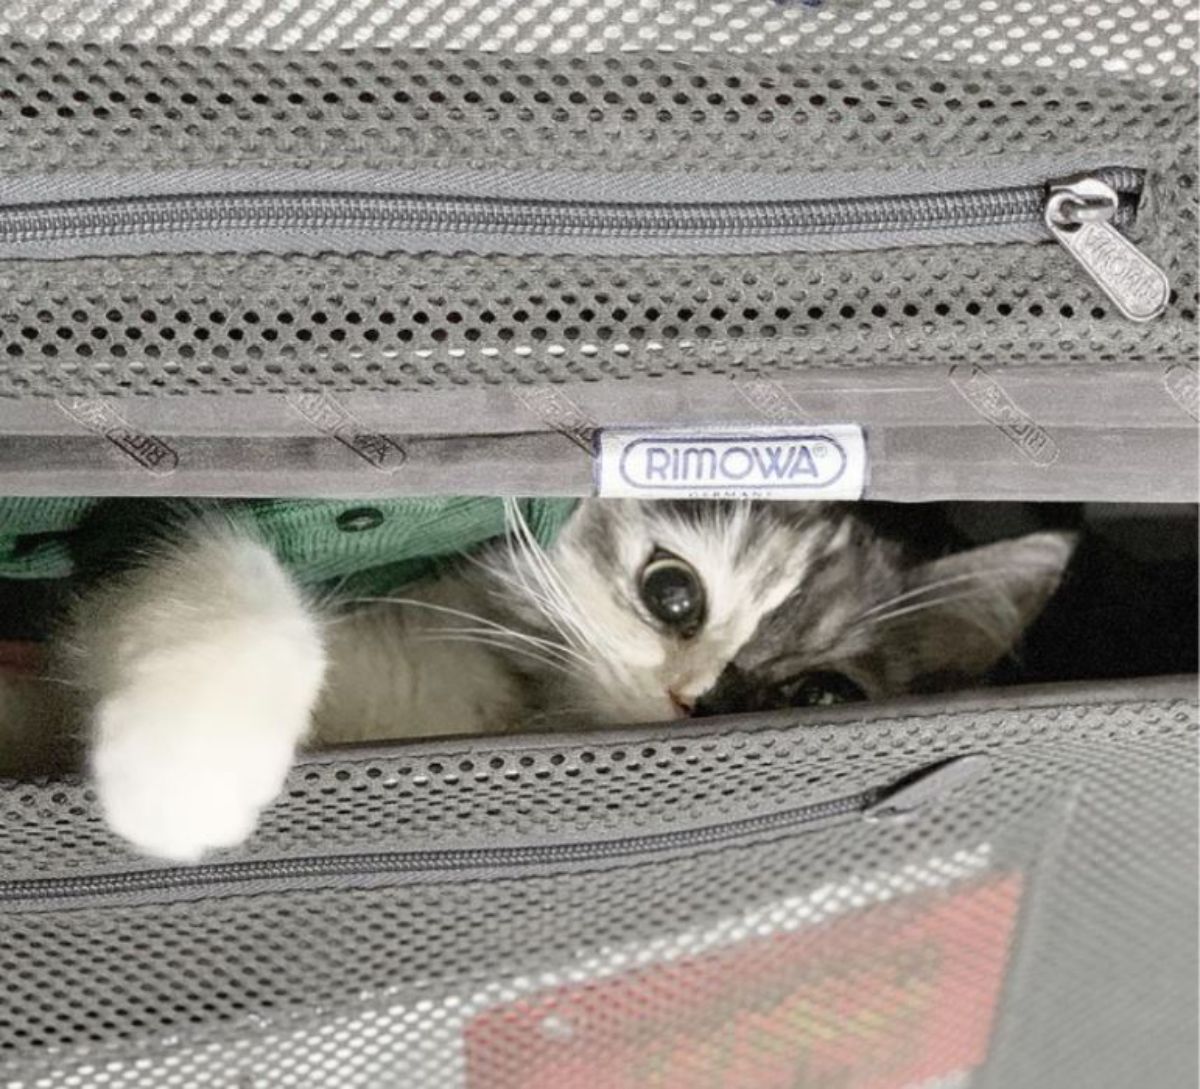 fluffy kitten with right side of face being grey and left side being black peeking from inside a grey suitcase